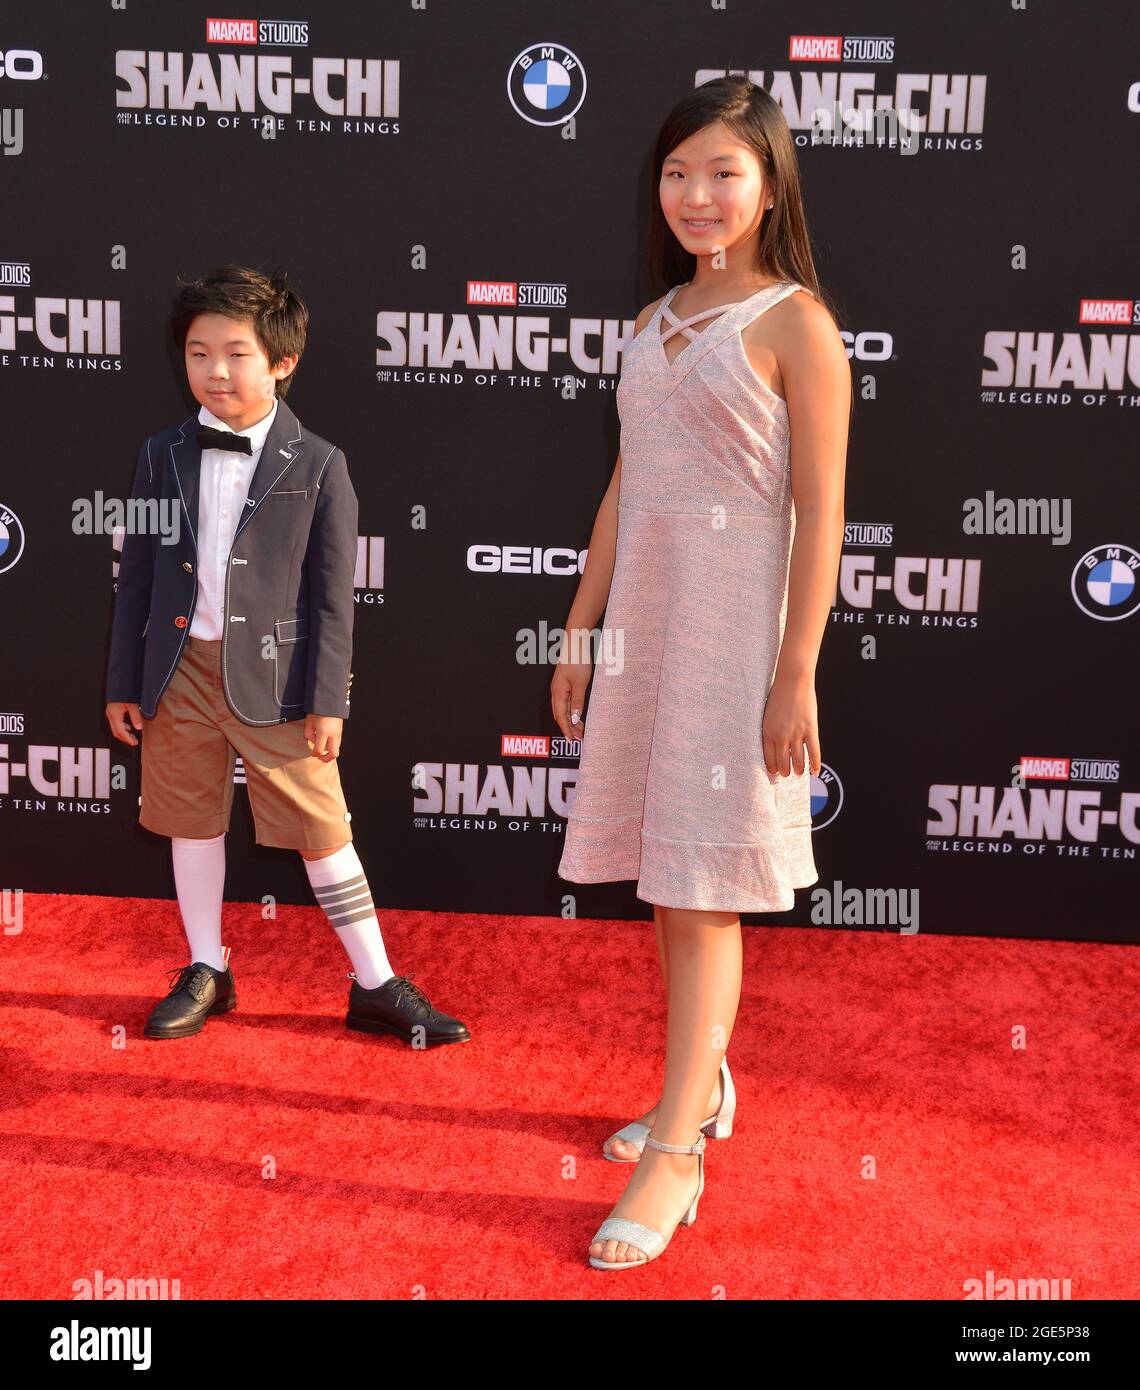 Los Angeles, USA. 17th Aug, 2021. Alan Kim and Alyssa Kim attends the Disney Marvel Premiere of Shang-Chi and the Legend of the Ten Rings at the El Capitan Theatre in Los Angeles. August 16, 2021. Credit: Tsuni/USA/Alamy Live News Stock Photo